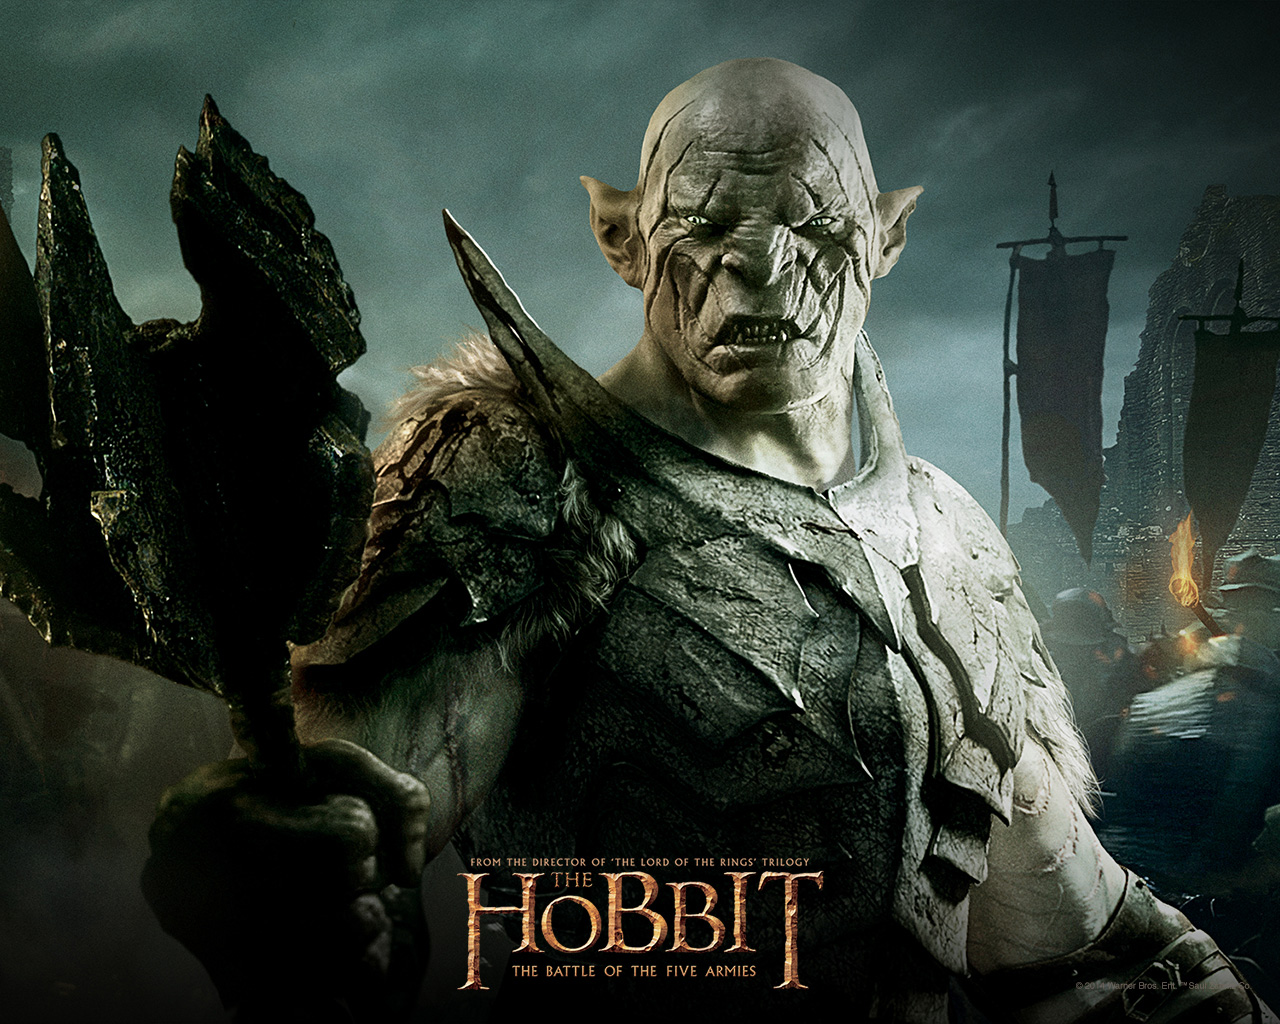 The Battle Of The Five Armies - Hobbit: An Unexpected Journey (2012) - HD Wallpaper 